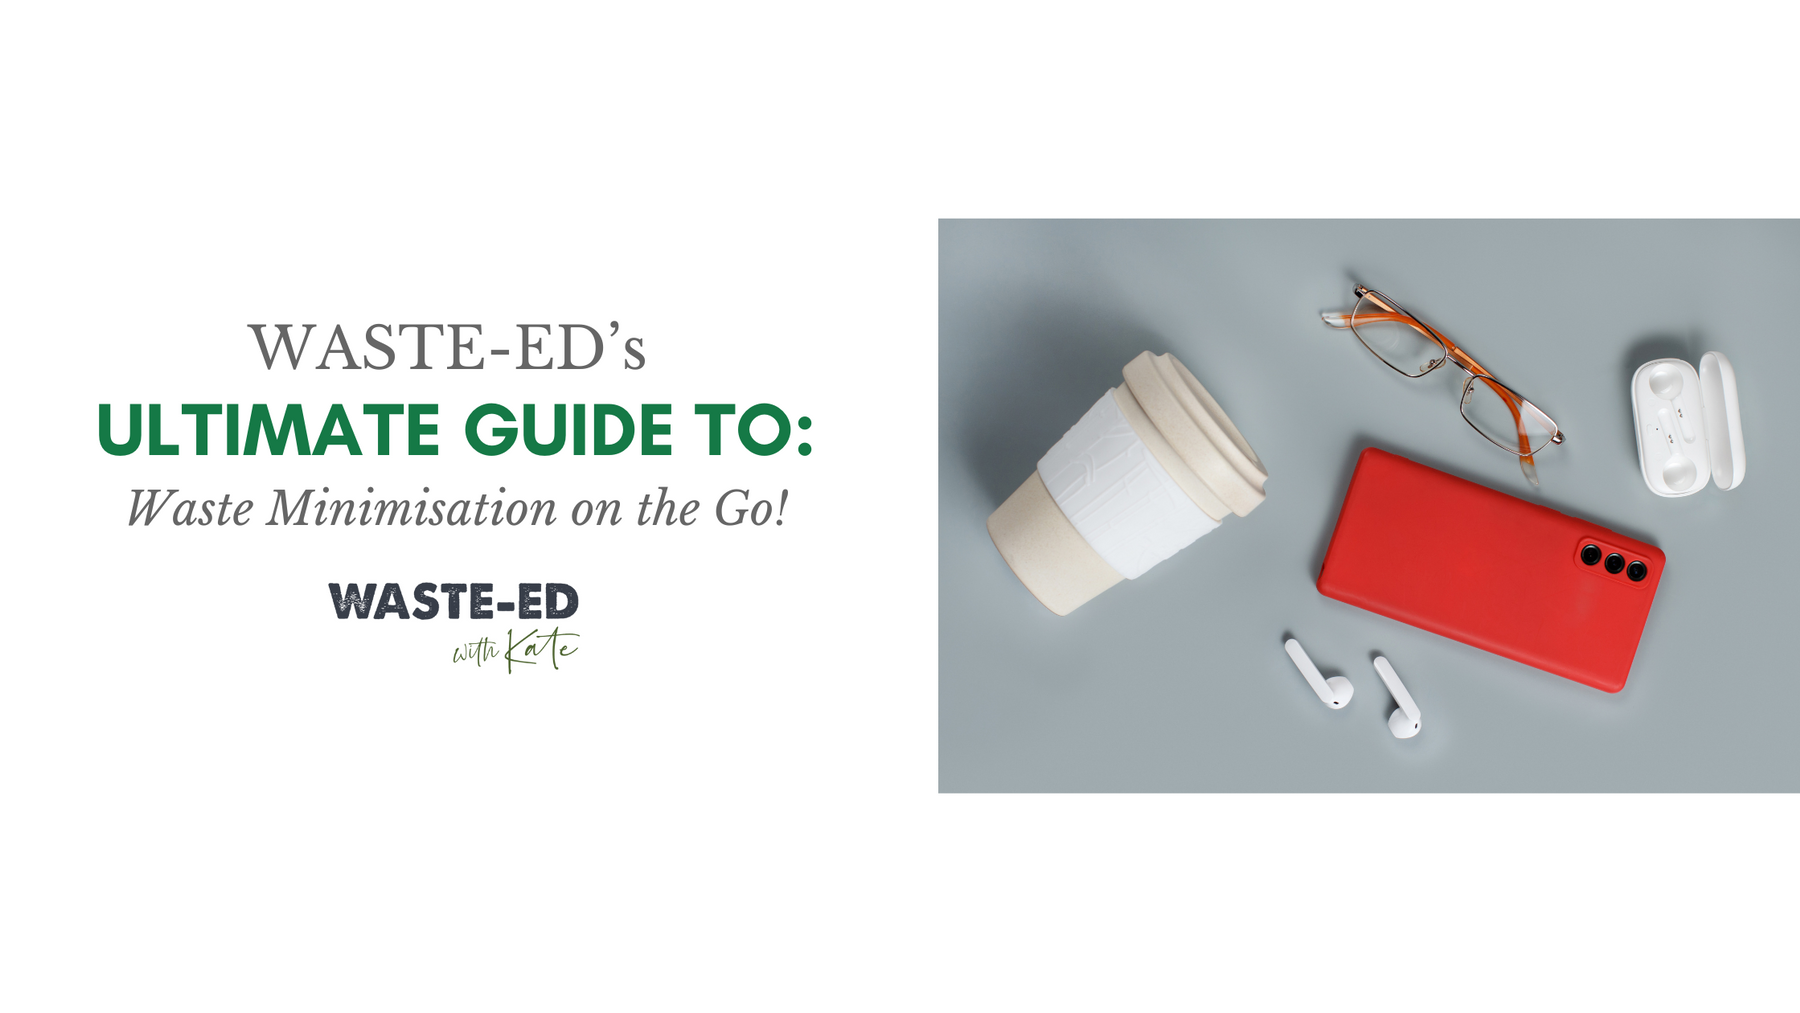 Waste-Ed's Ultimate Guide to: Reduction while out and about!